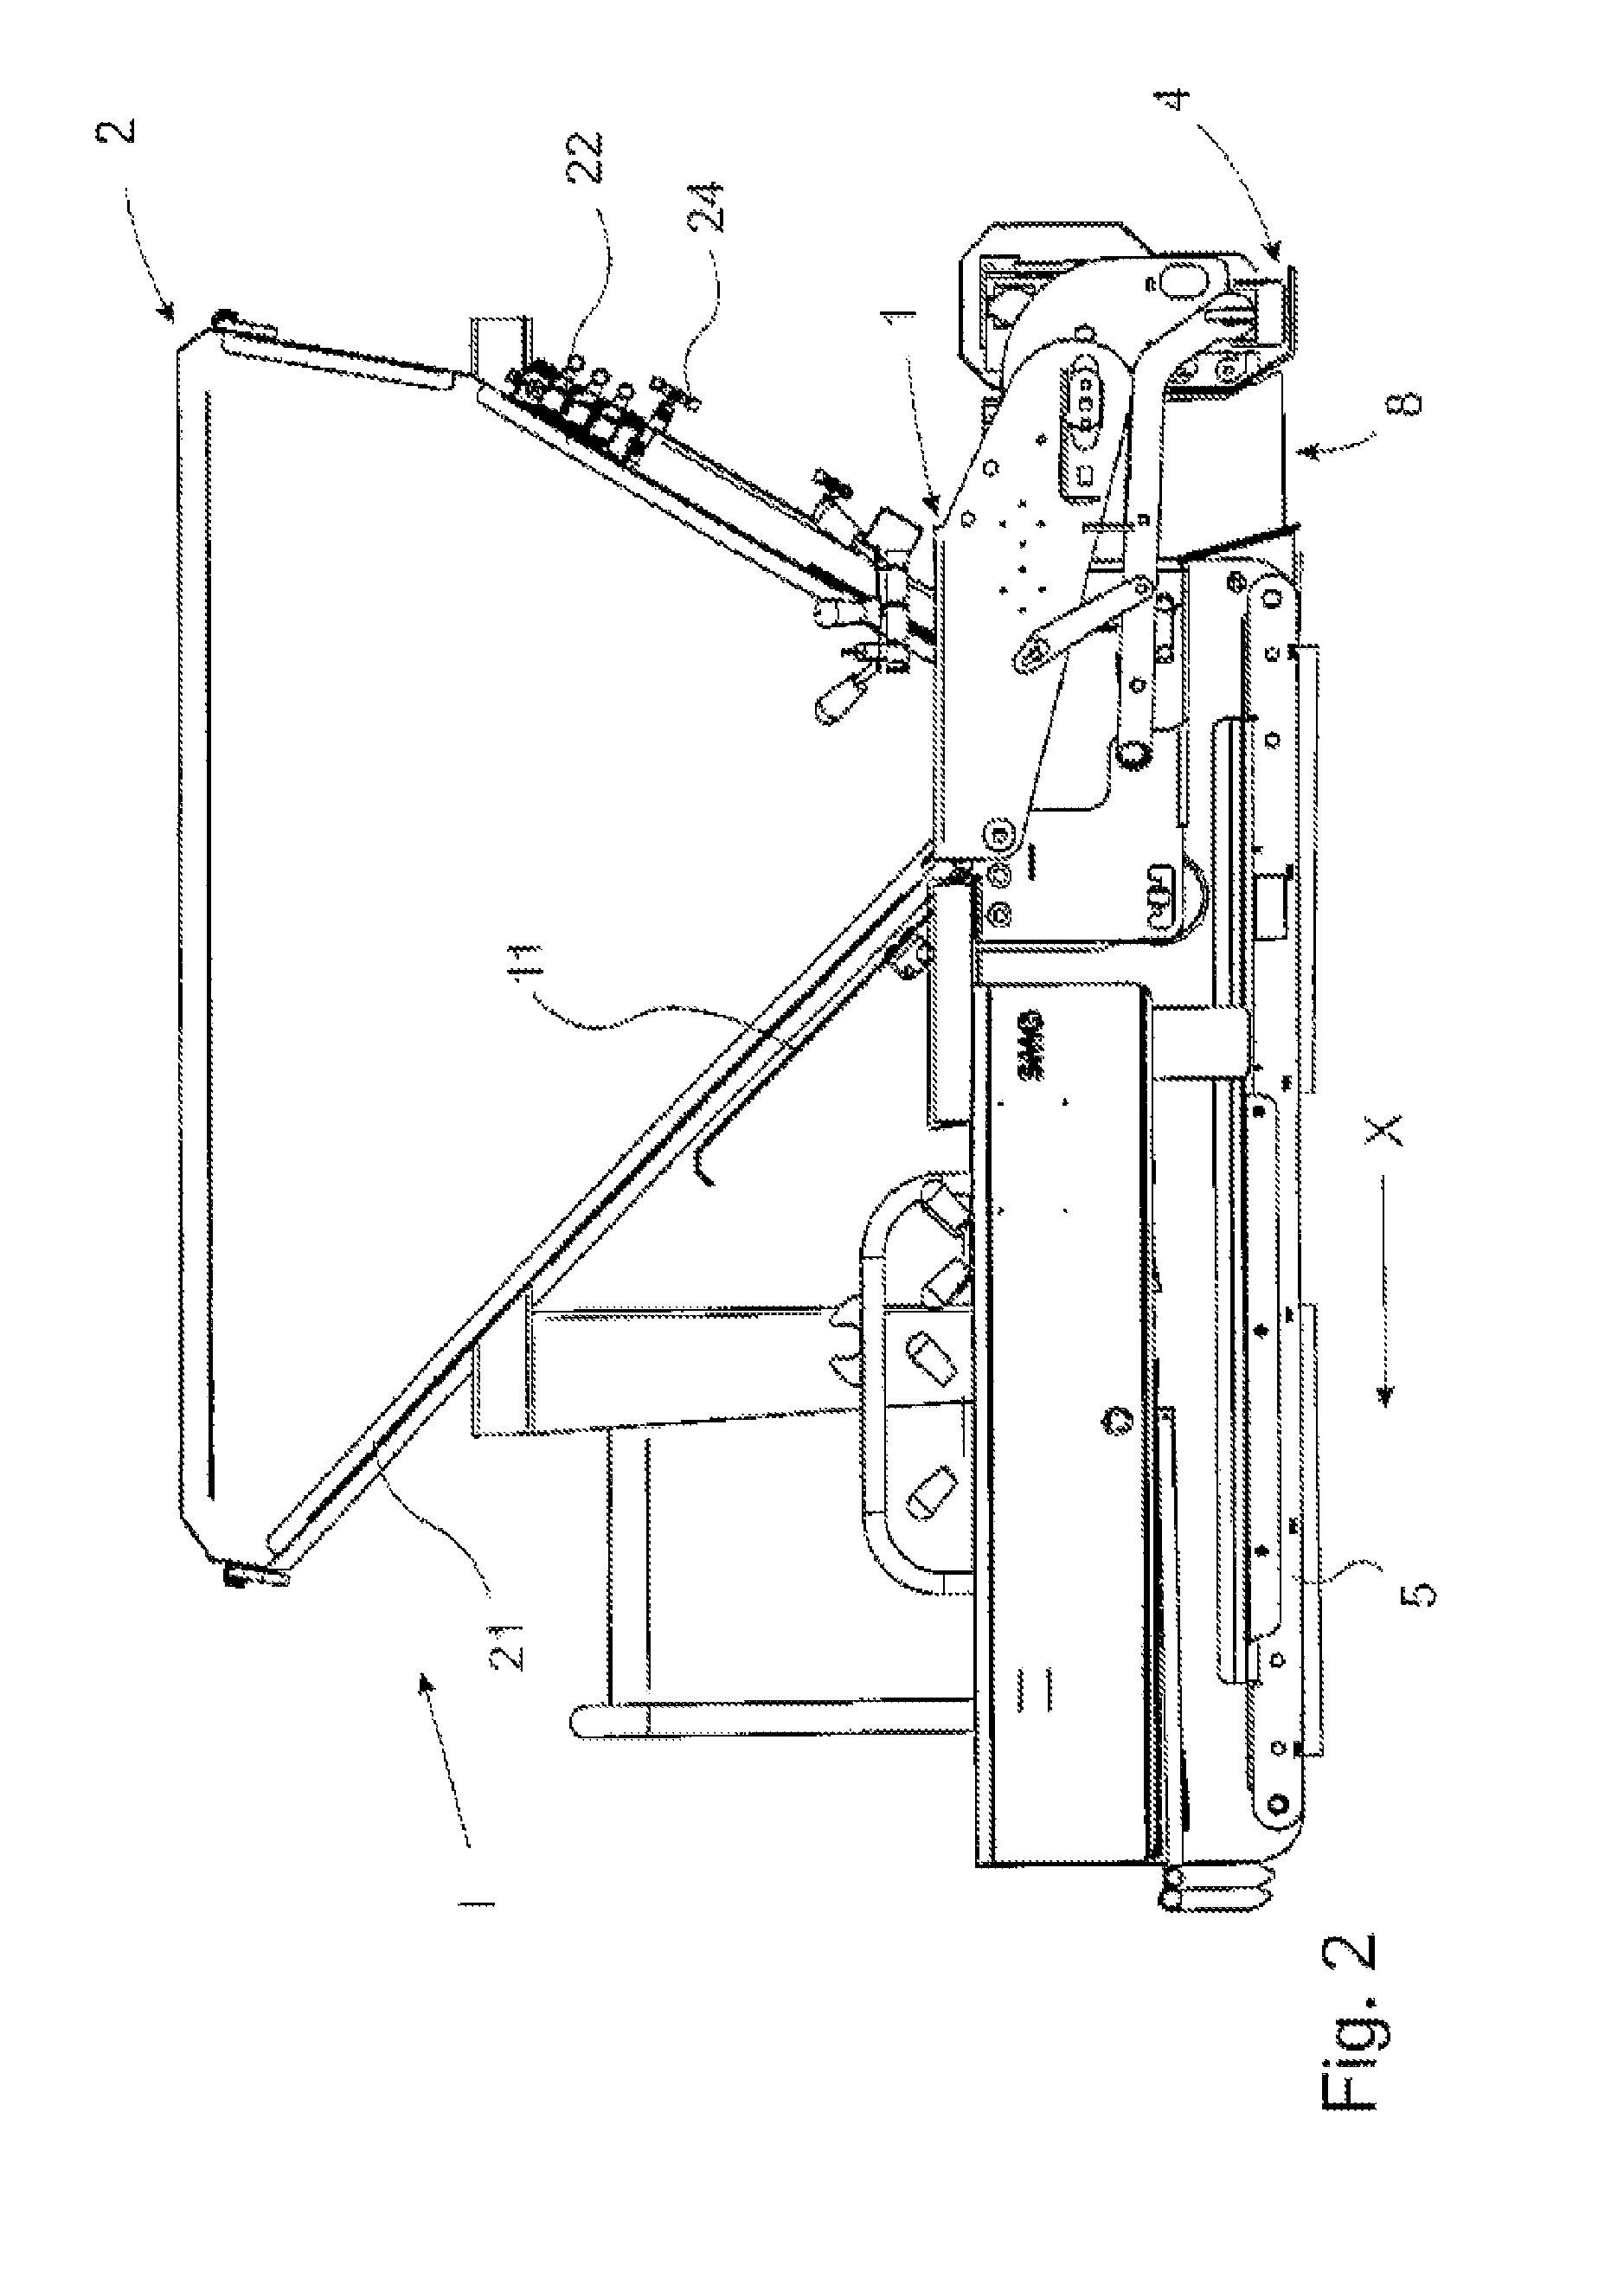 Paving machine with a storage container